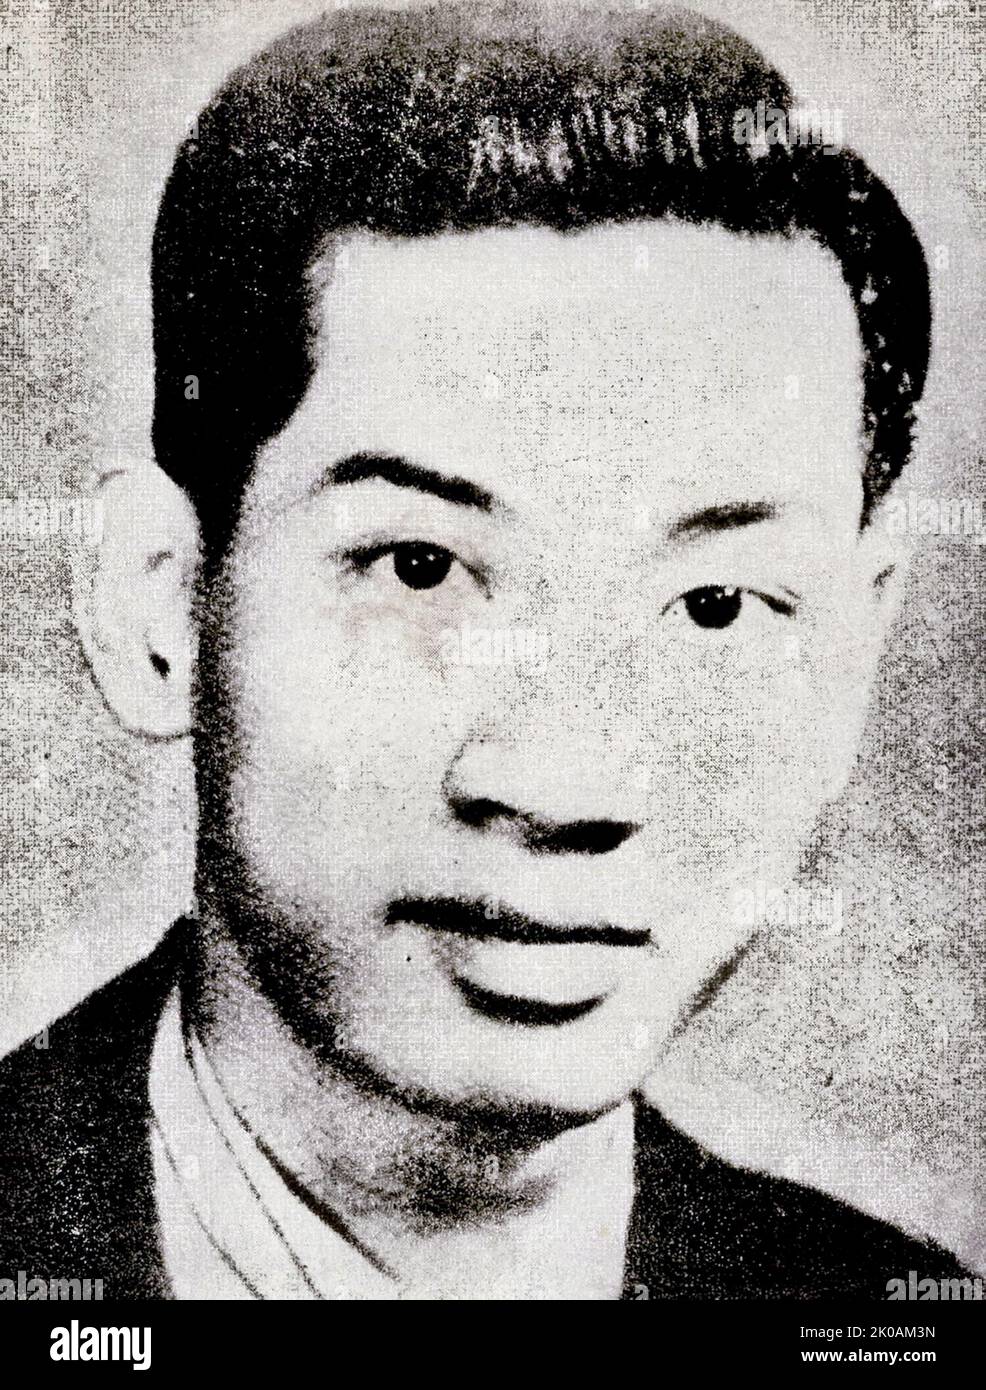 Liang Renda (1916-1947), from Zhongshan, Guangdong Province. He was a staff at Yong'an Company and participated in the 'Save domestic products, boycott American products' meeting. He was beaten to death during the fight with a spy that was trying to sabotage the meeting. Stock Photo